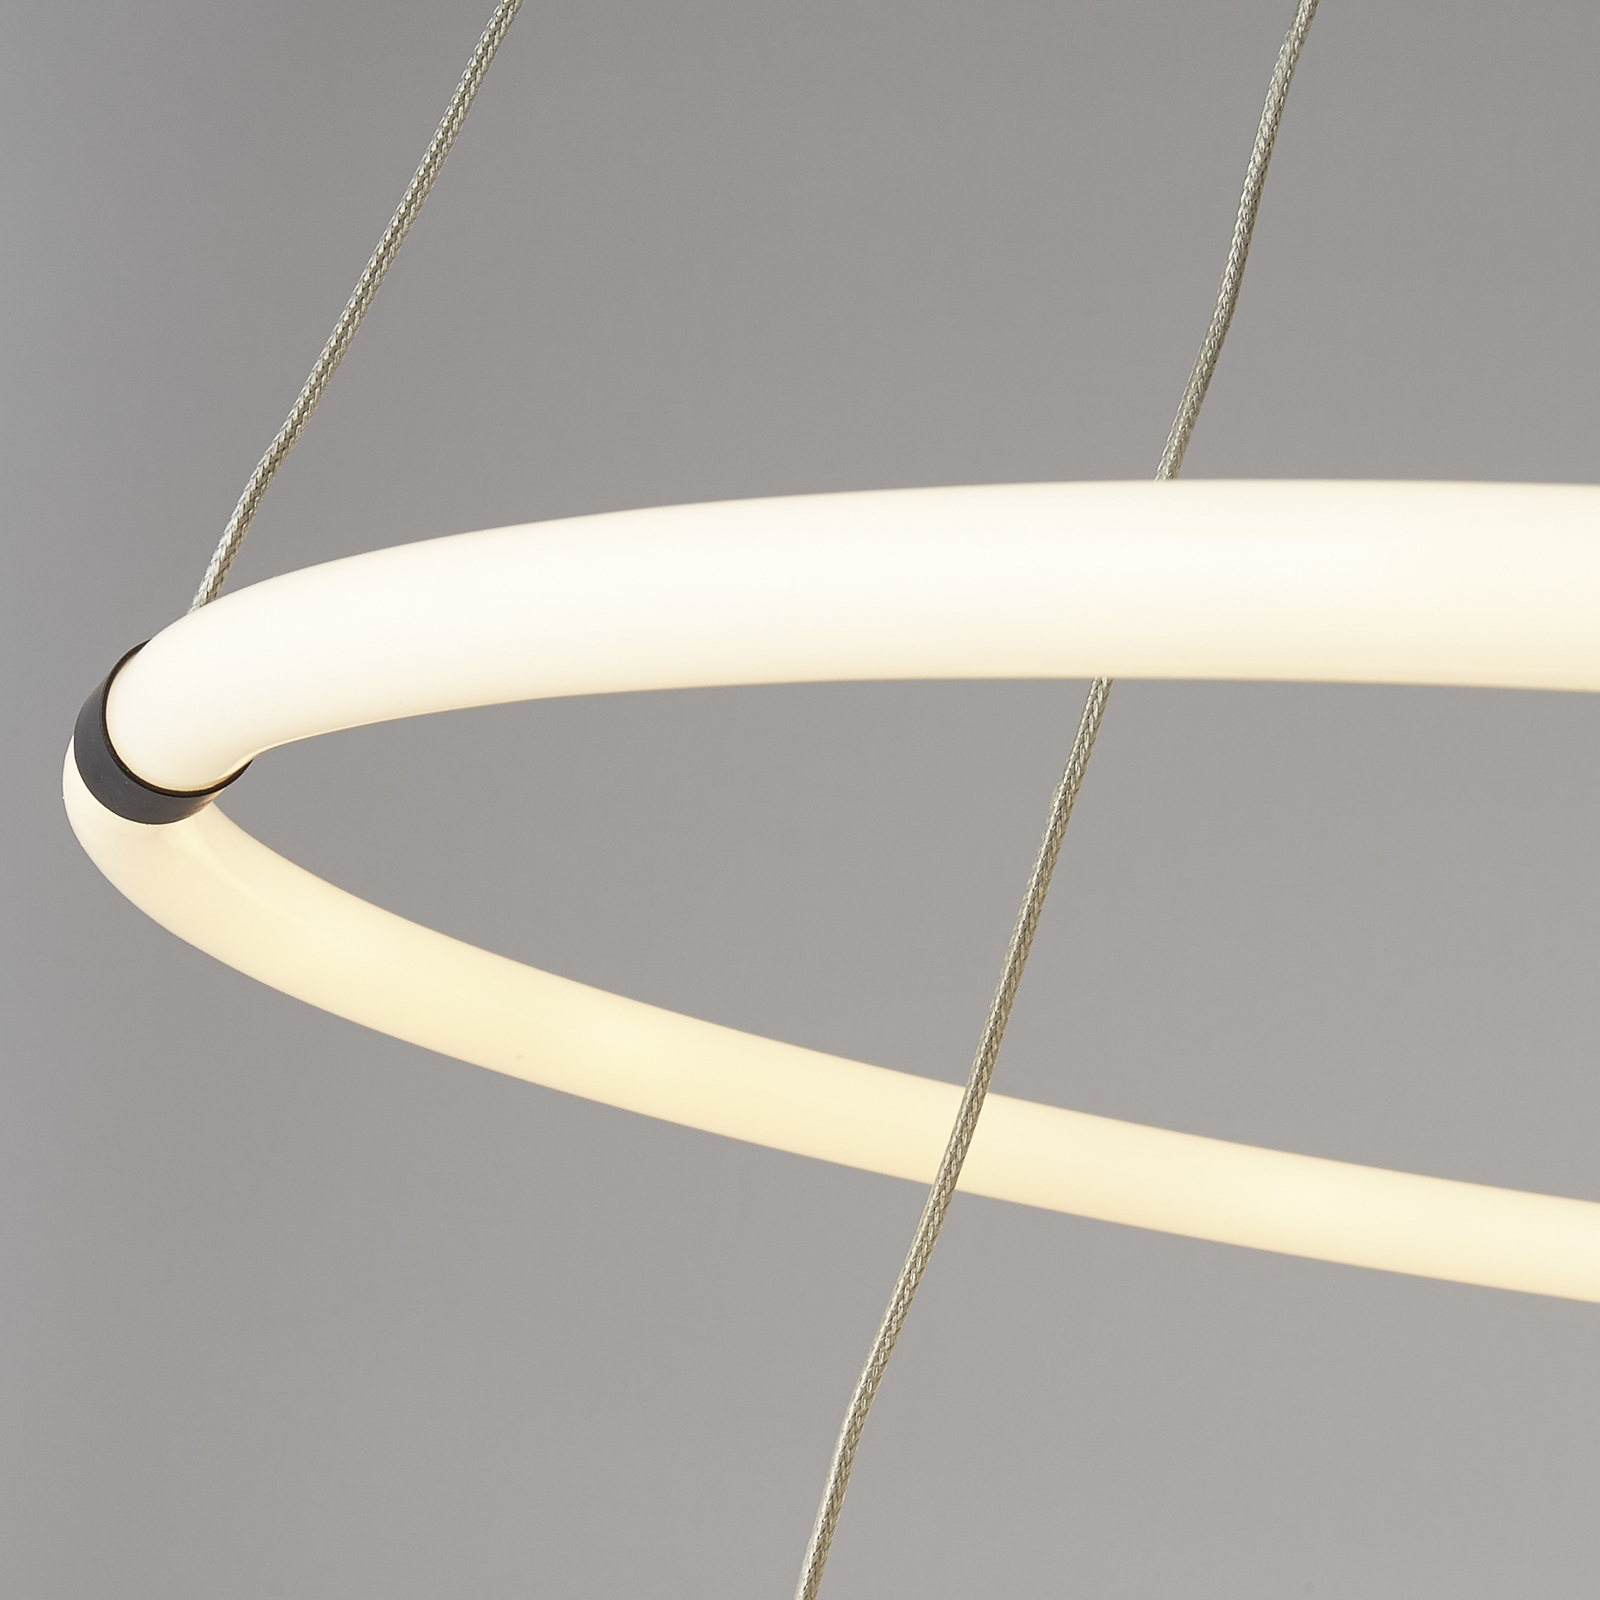 Suspension LED Revolve, dimmable, à 2 lampes